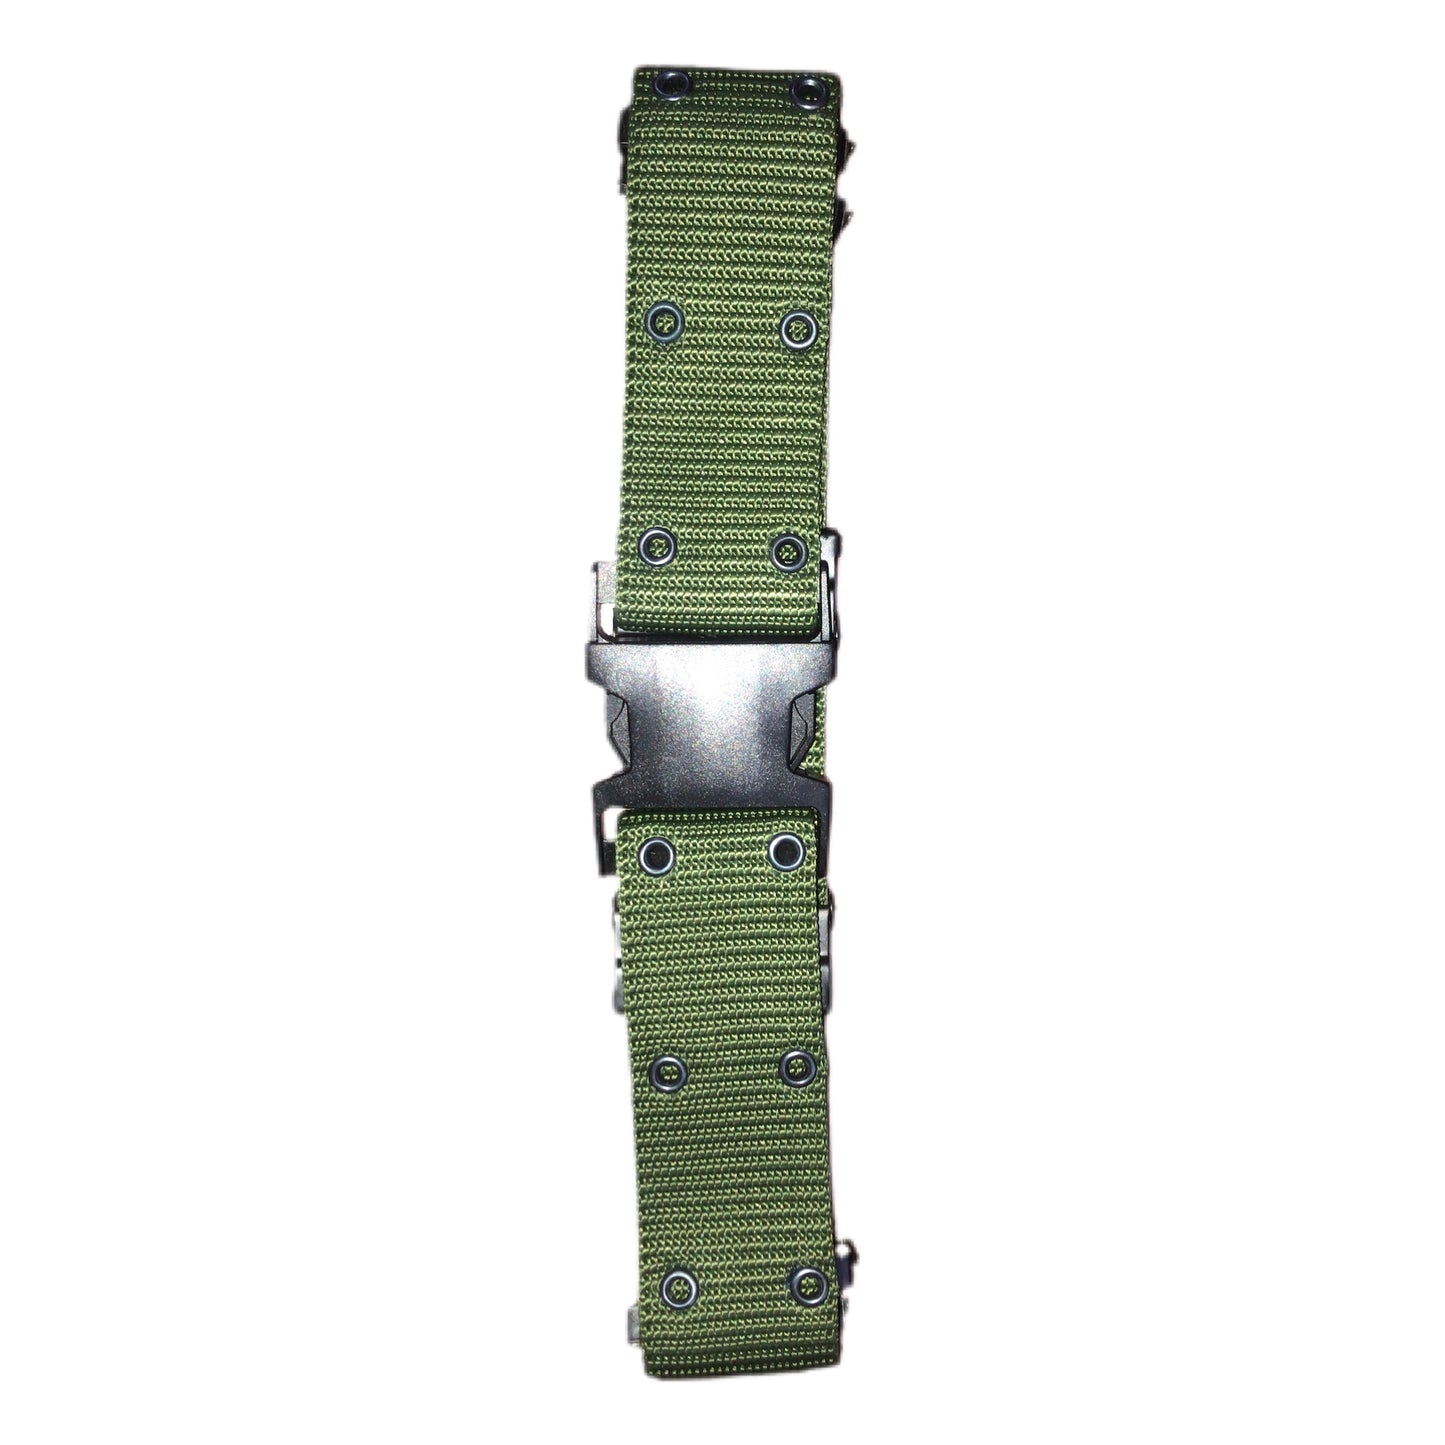 Men's Tactical Combat Belt with Quick Release Buckle - Army, Police, Military, Outdoor